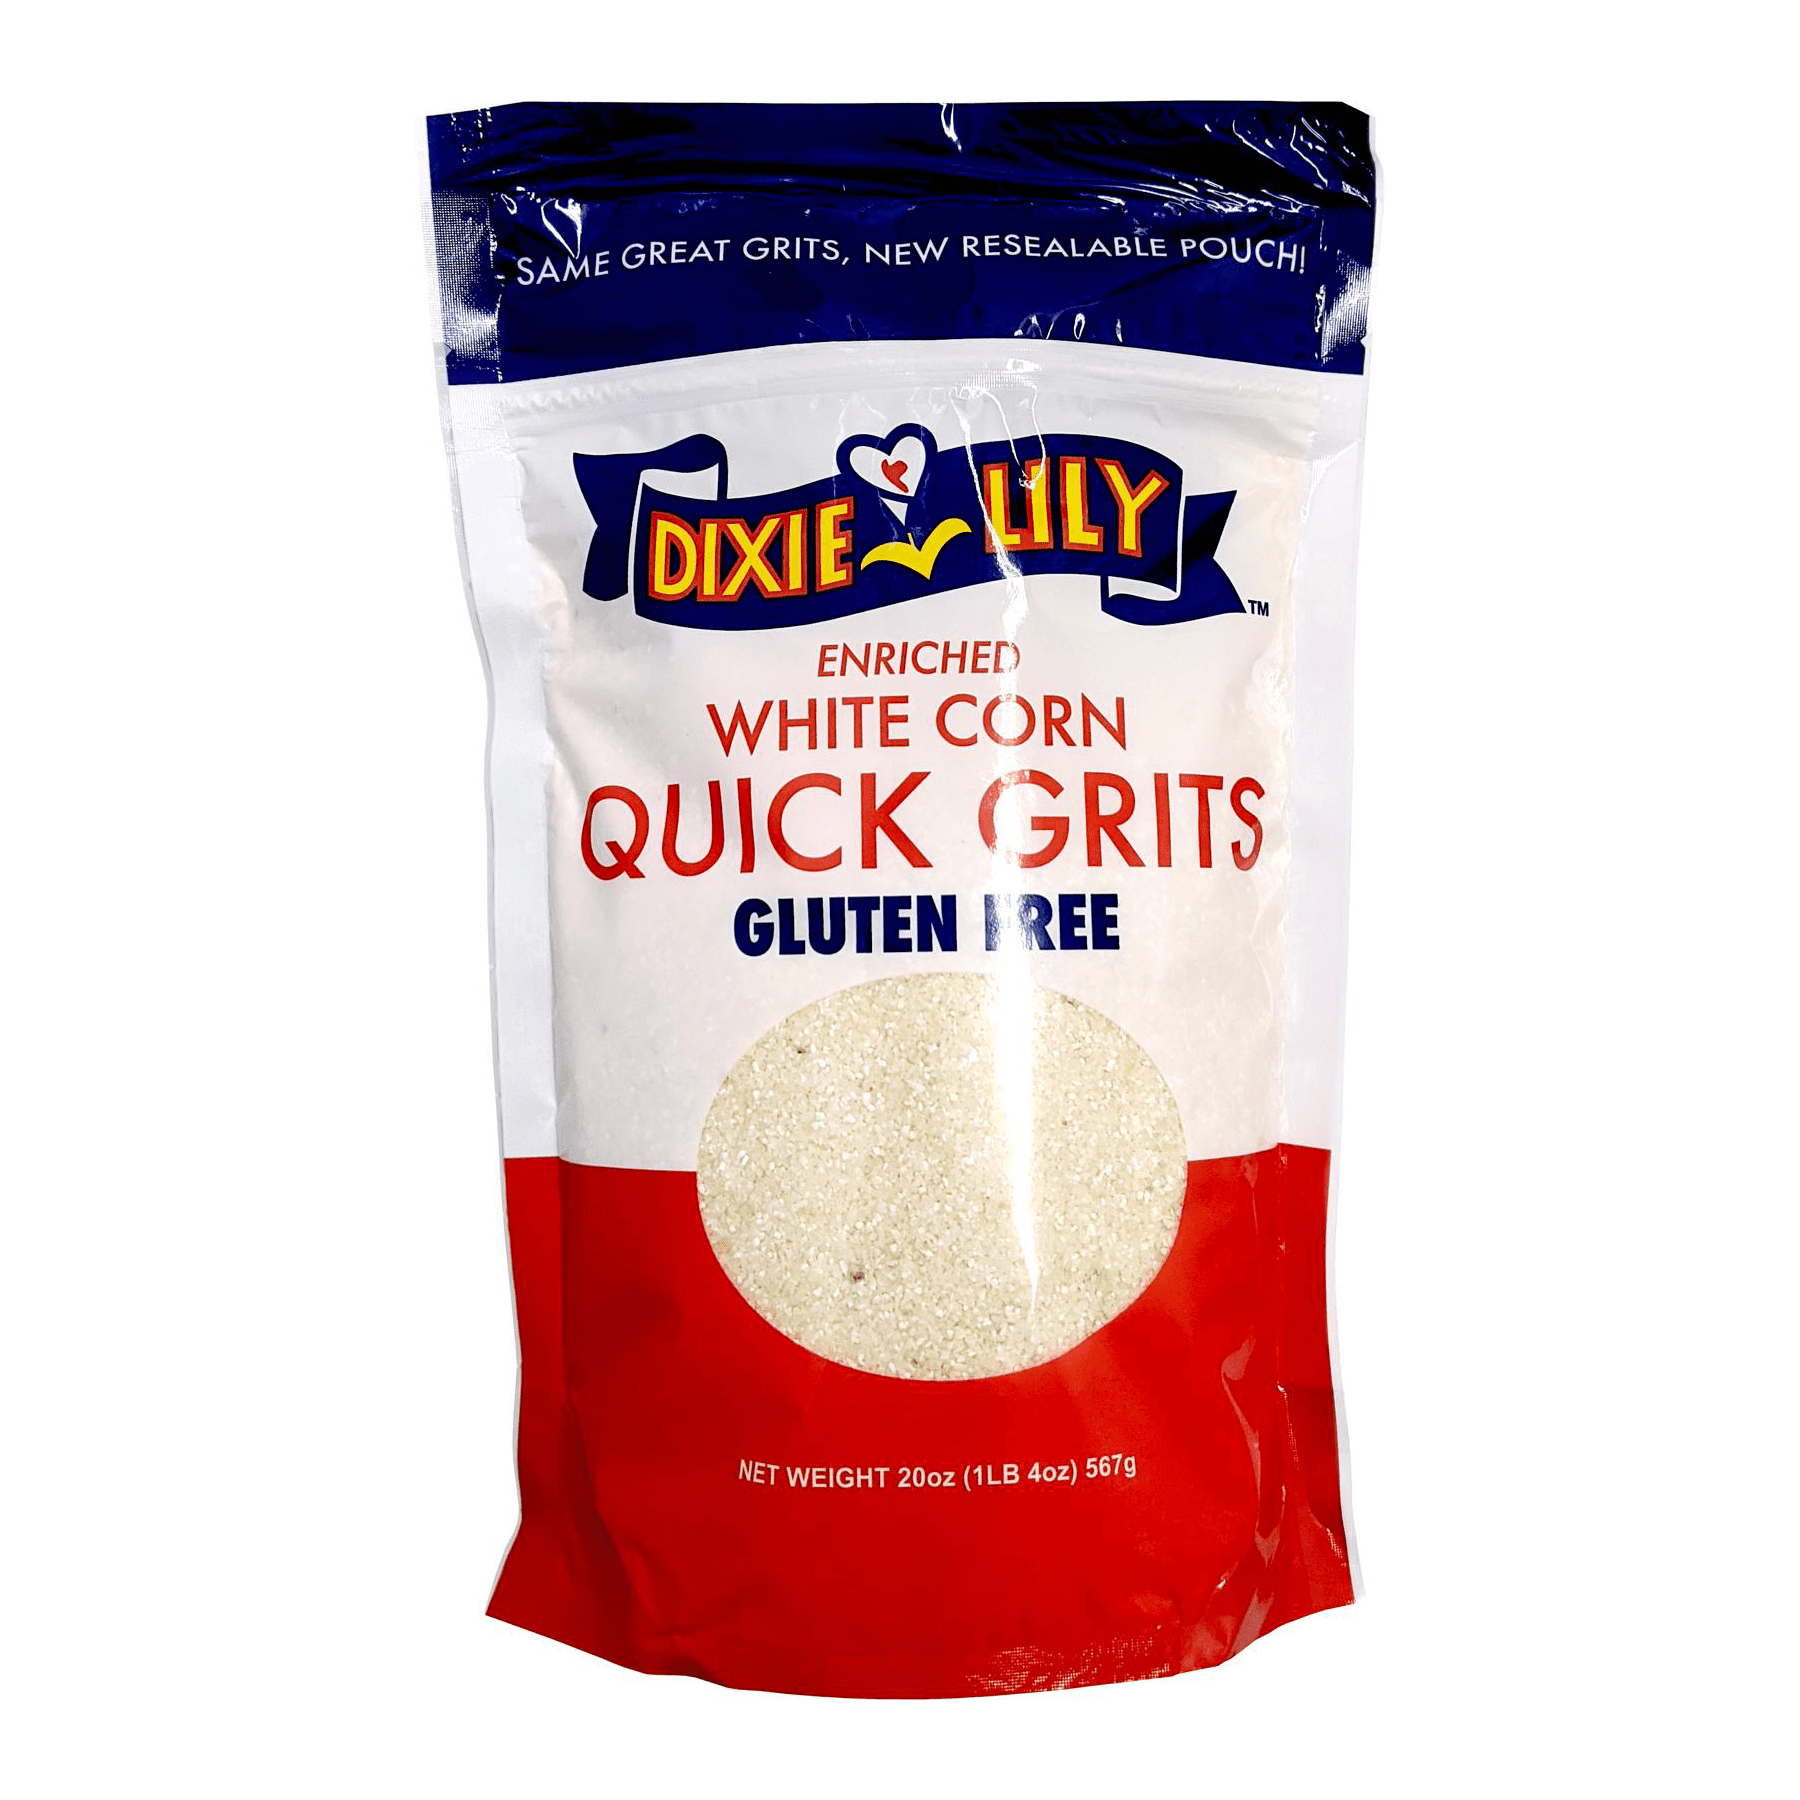 Dixie Lily Quick Grits